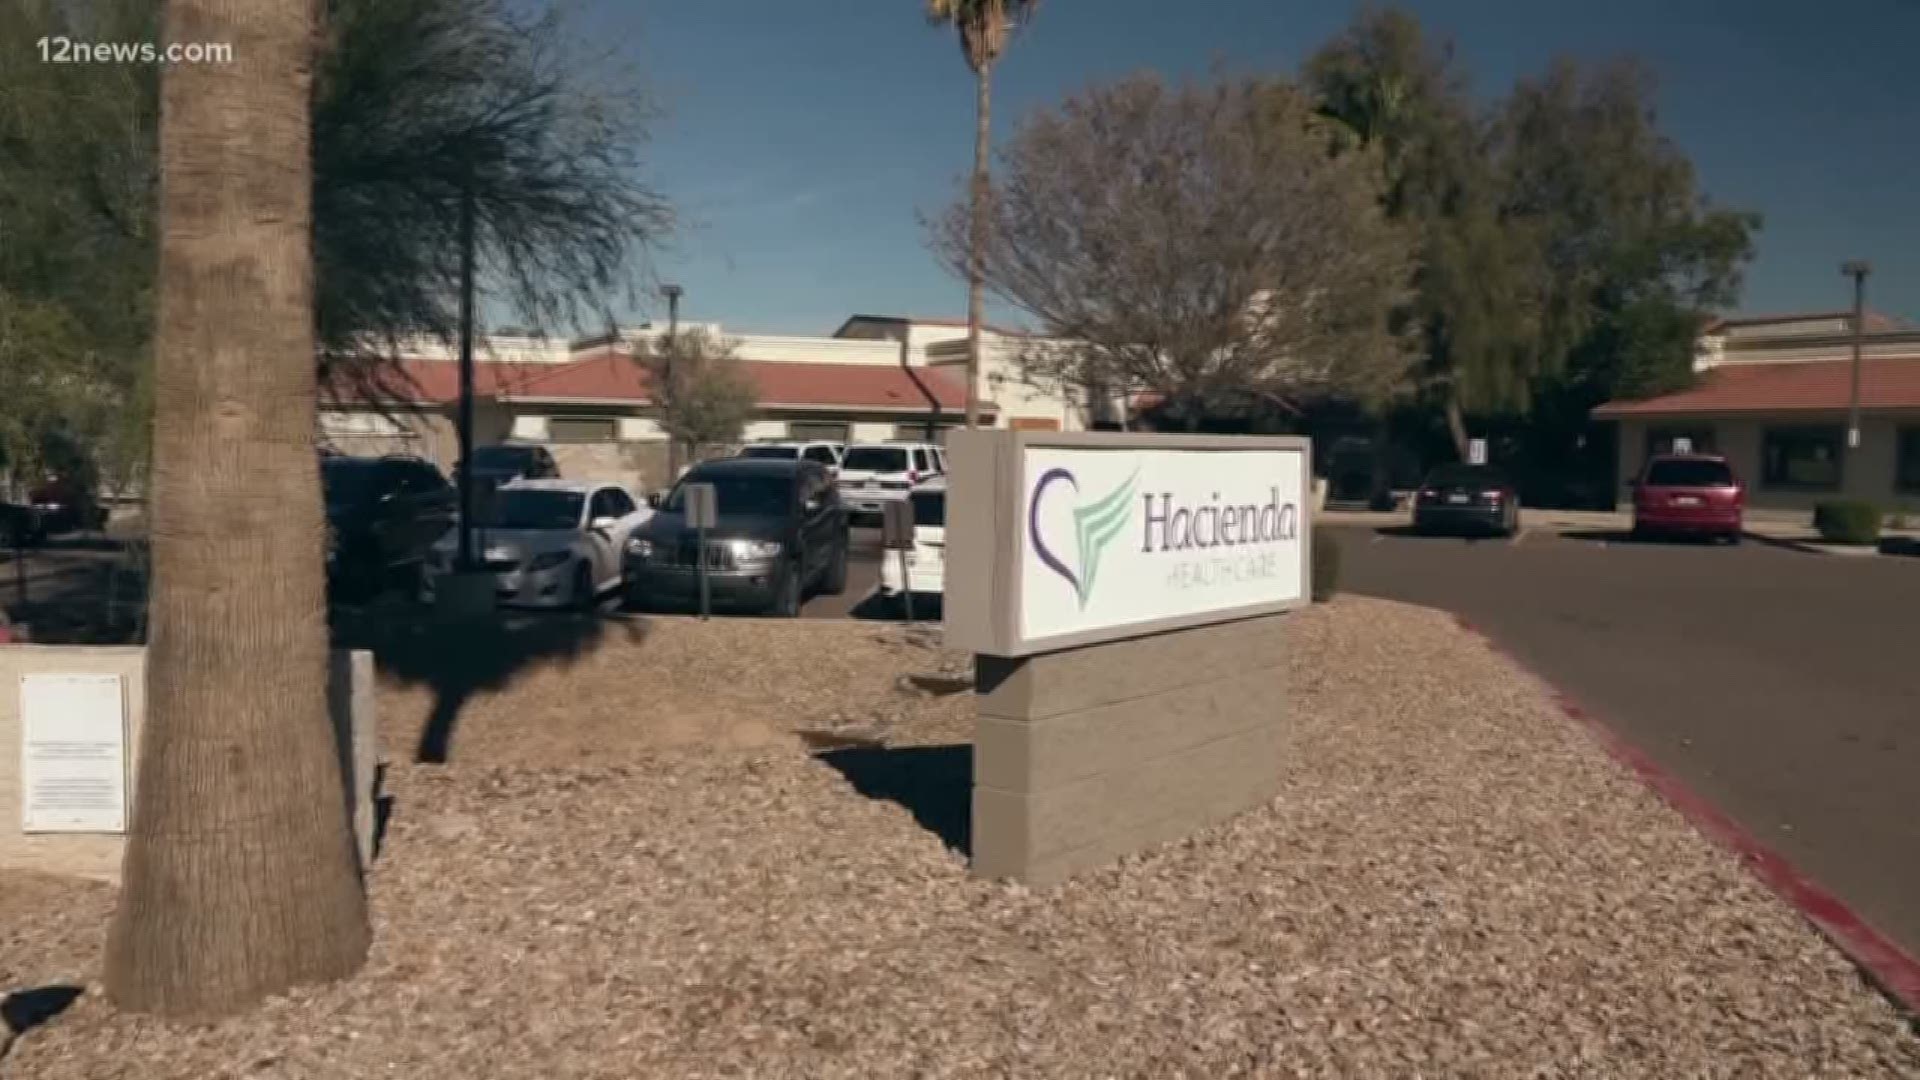 Two weeks ago Arizona regulators ordered Hacienda Healthcare to hire and pay for an outside manager to run the Phoenix facility. They hired Benchmark Human Services.